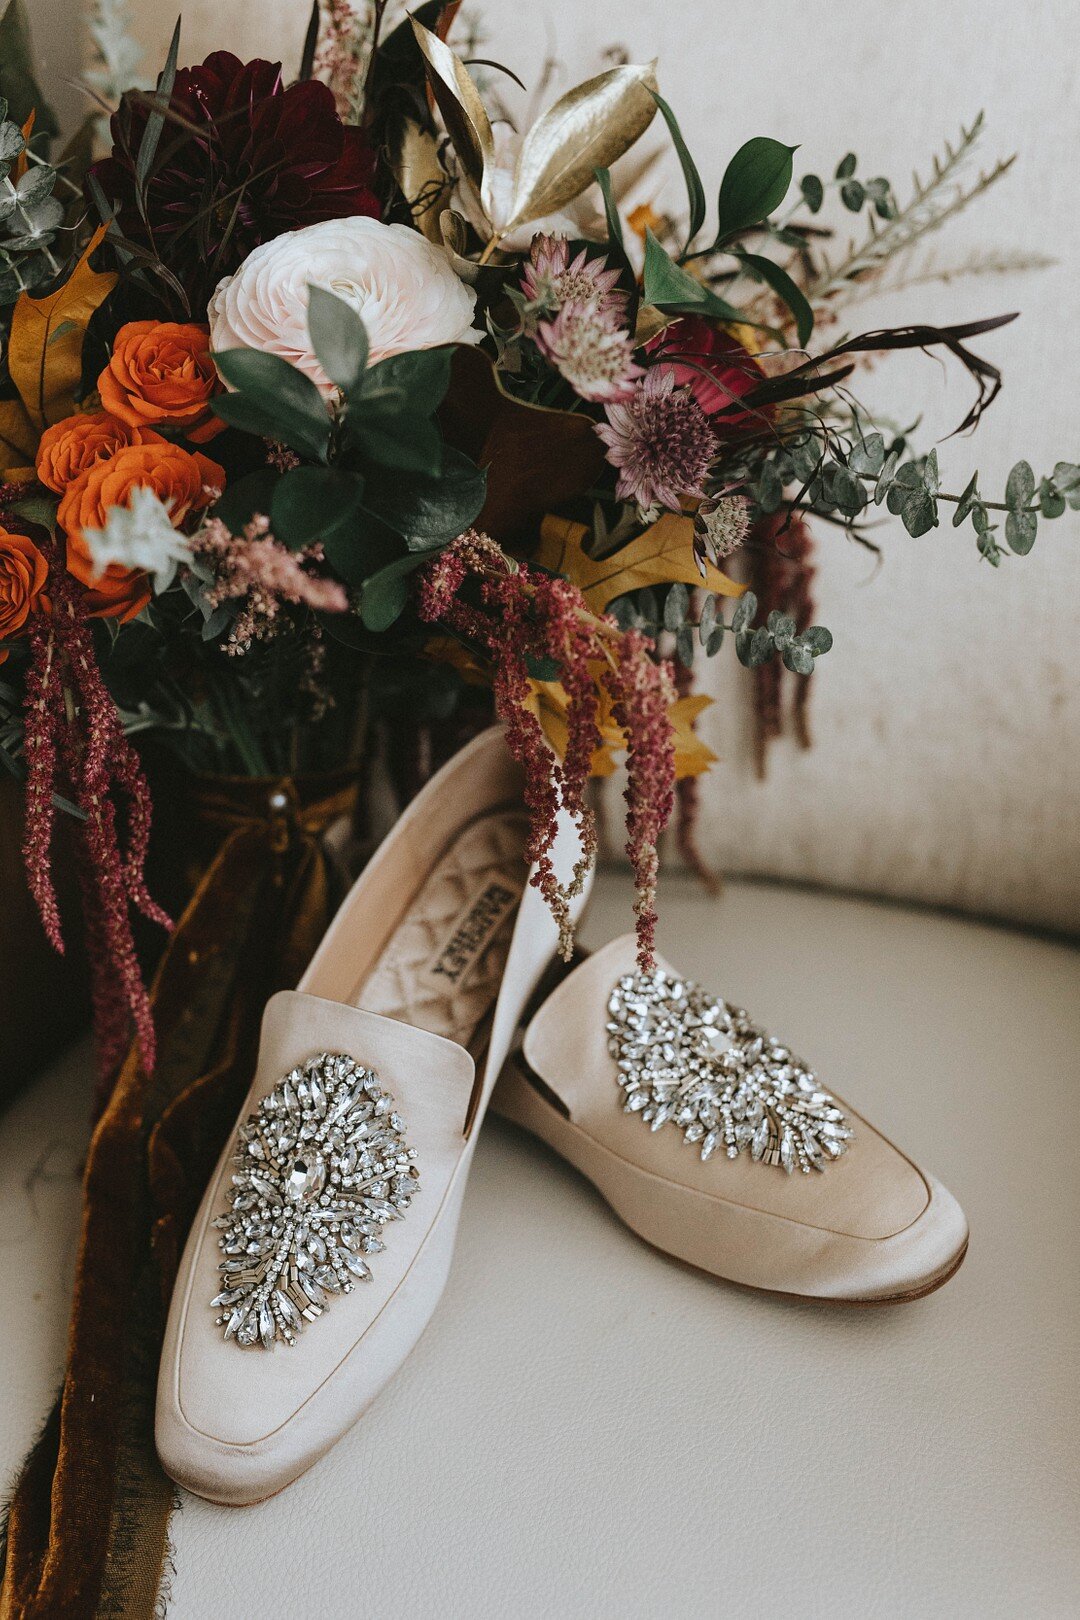 Boho Luxe Fall Wedding at Old Mill Rose Valley